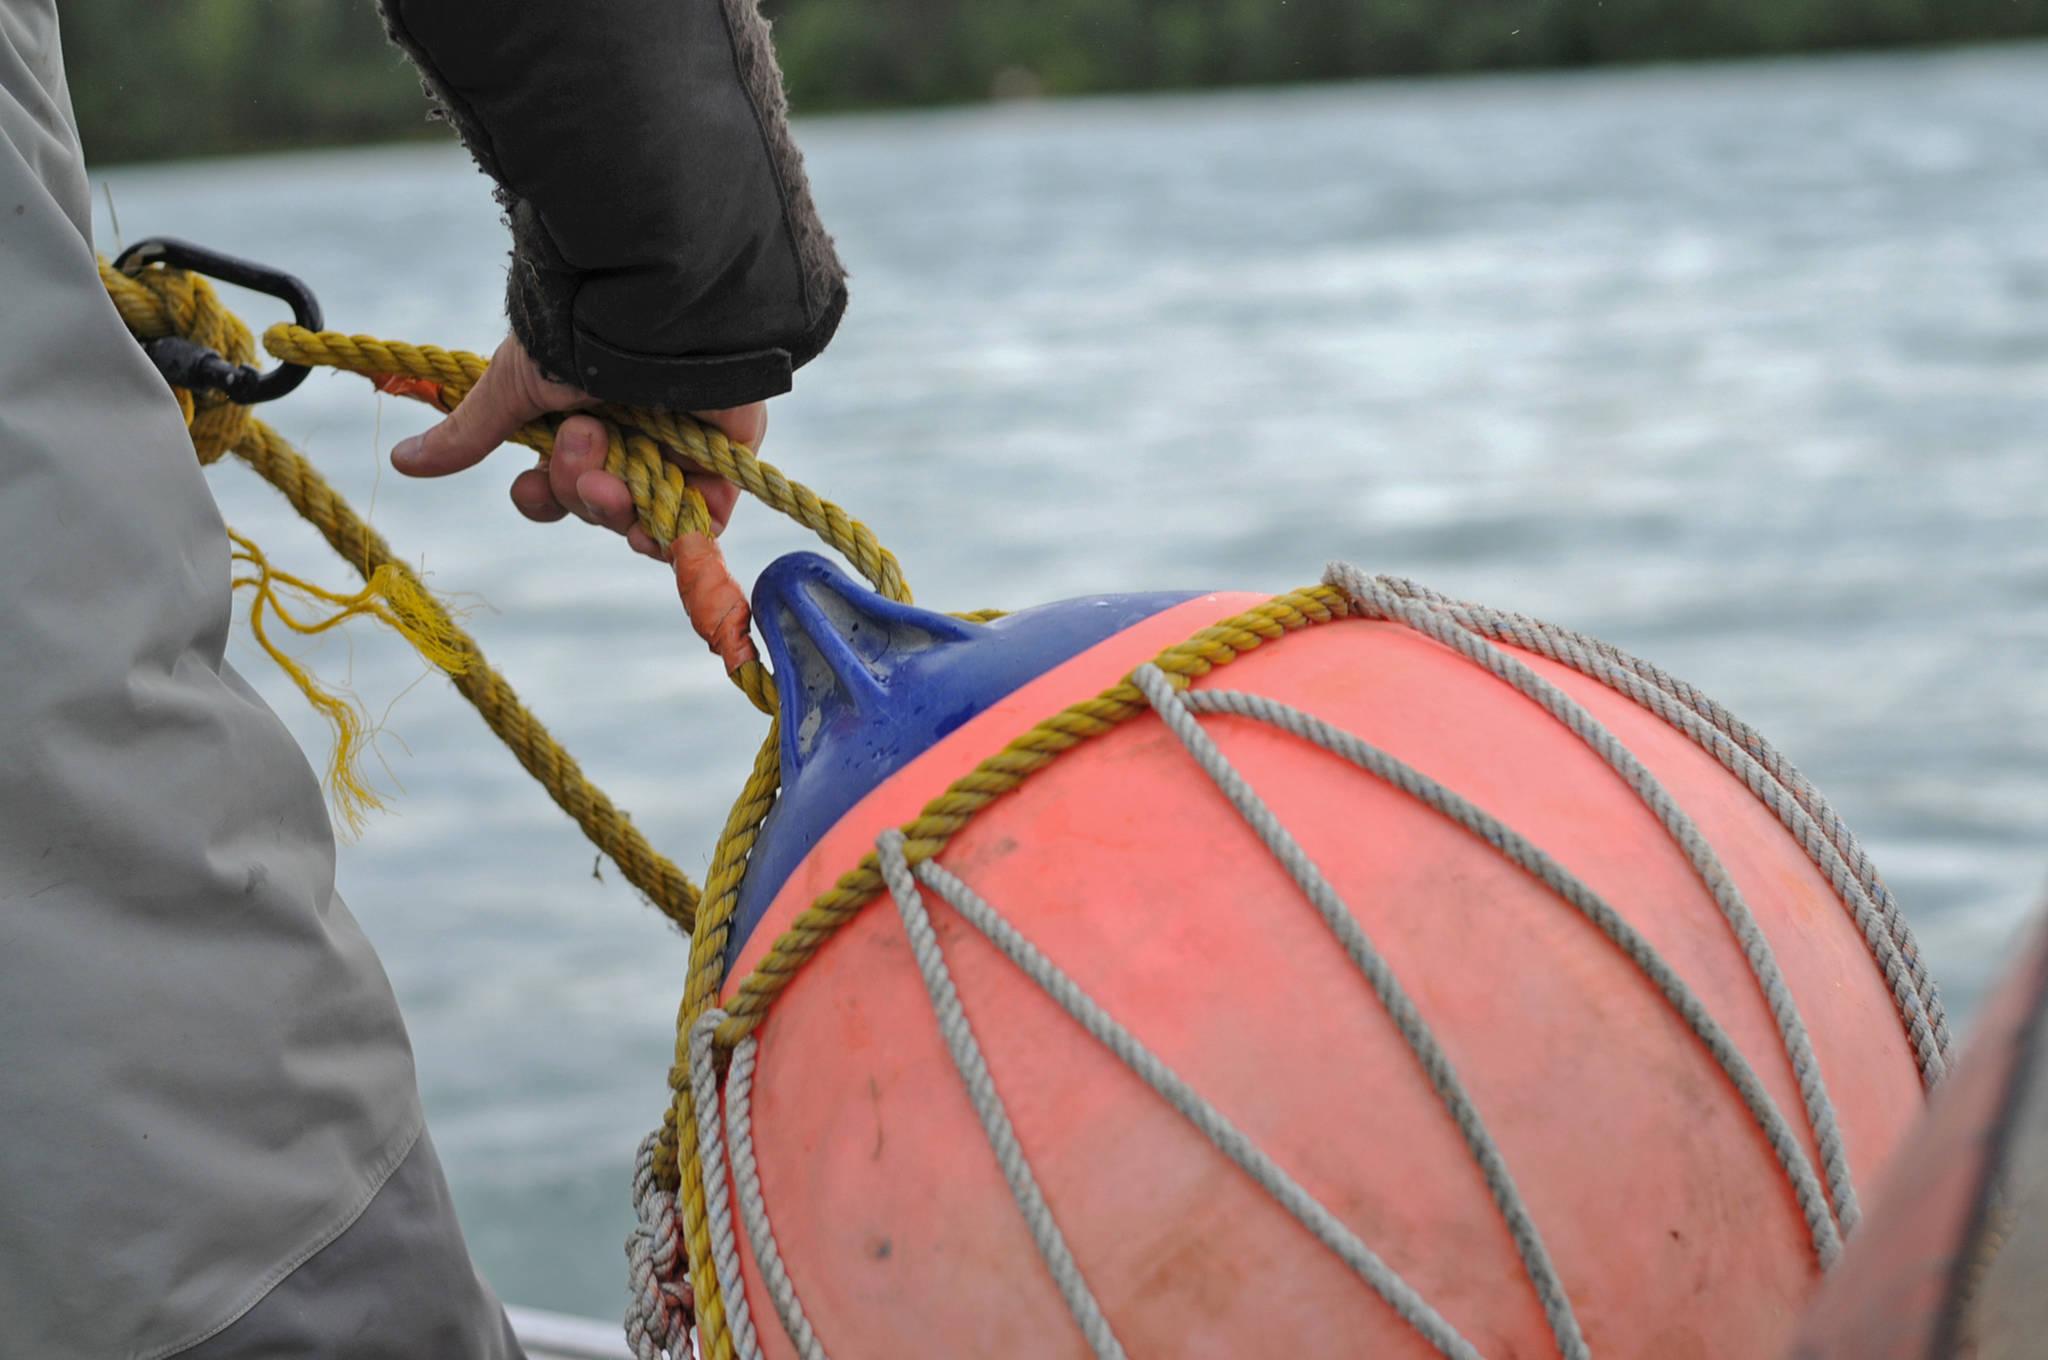 Daniel Reynolds, an environmental technician with the Ninilchik Traditional Council, prepares to place the buoy marking the tribe’s subsistence gillnet on the Kenai River on Aug. 14, 2016 near Soldotna. On April 3, the Federal Subsistence Board granted the Ninilchik Traditional Council’s special action request for the gillnet to operate again in 2017. (Elizabeth Earl/Peninsula Clarion, file)